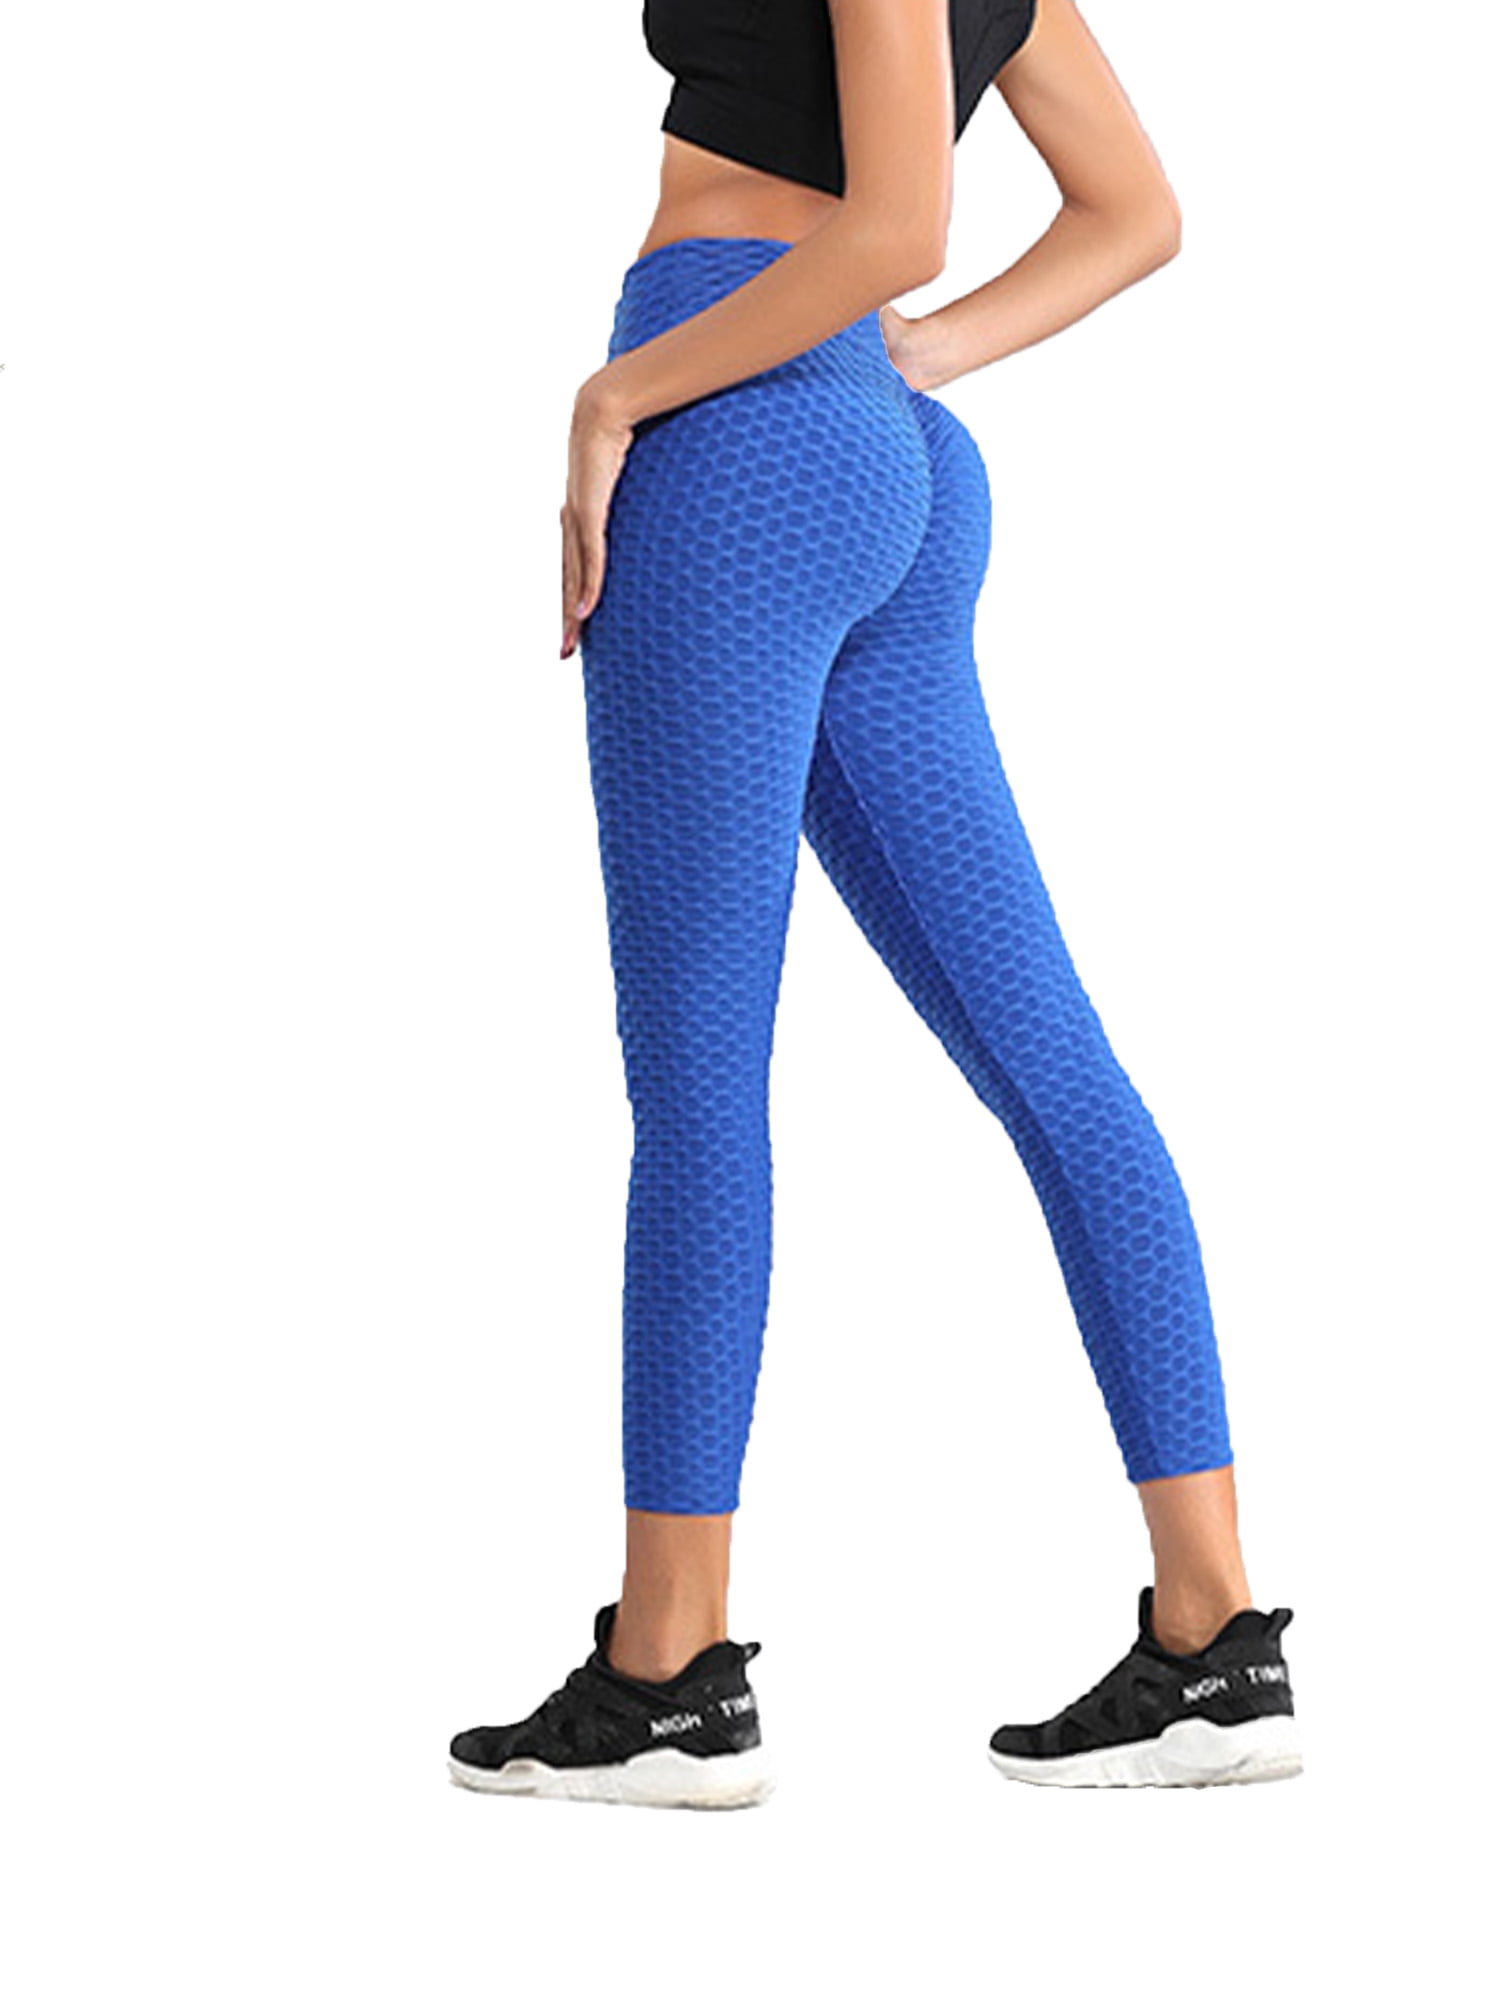 Womens High Waist Leggings Ruched Yoga Pants Push Up Sports Gym Fitness Trousers 